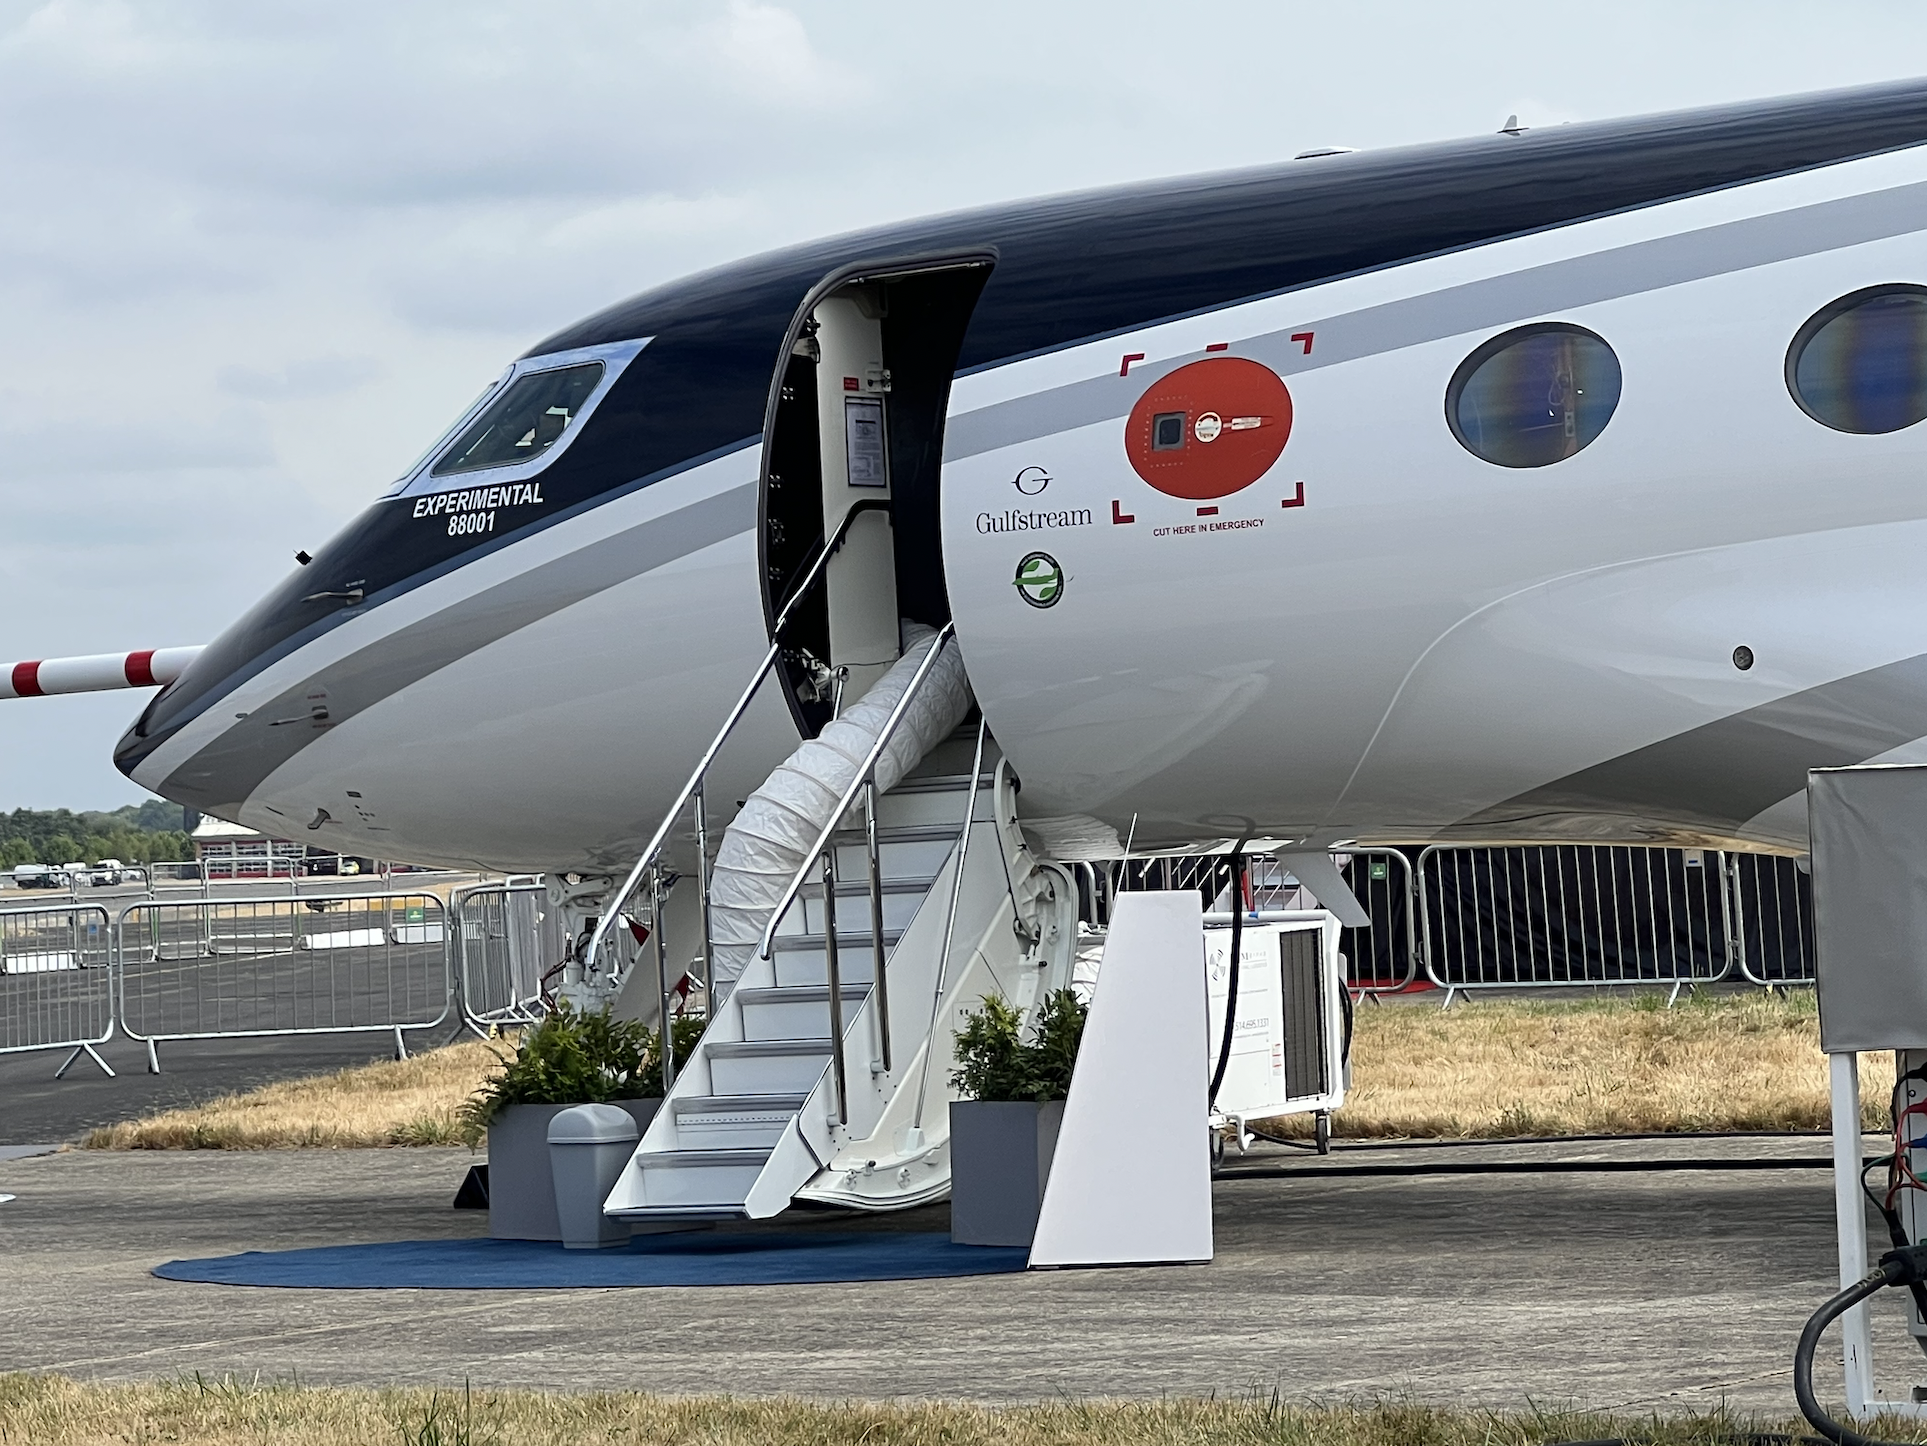 The Gulfstream G800 test plane at the Farnborough Air Show in July 2022.